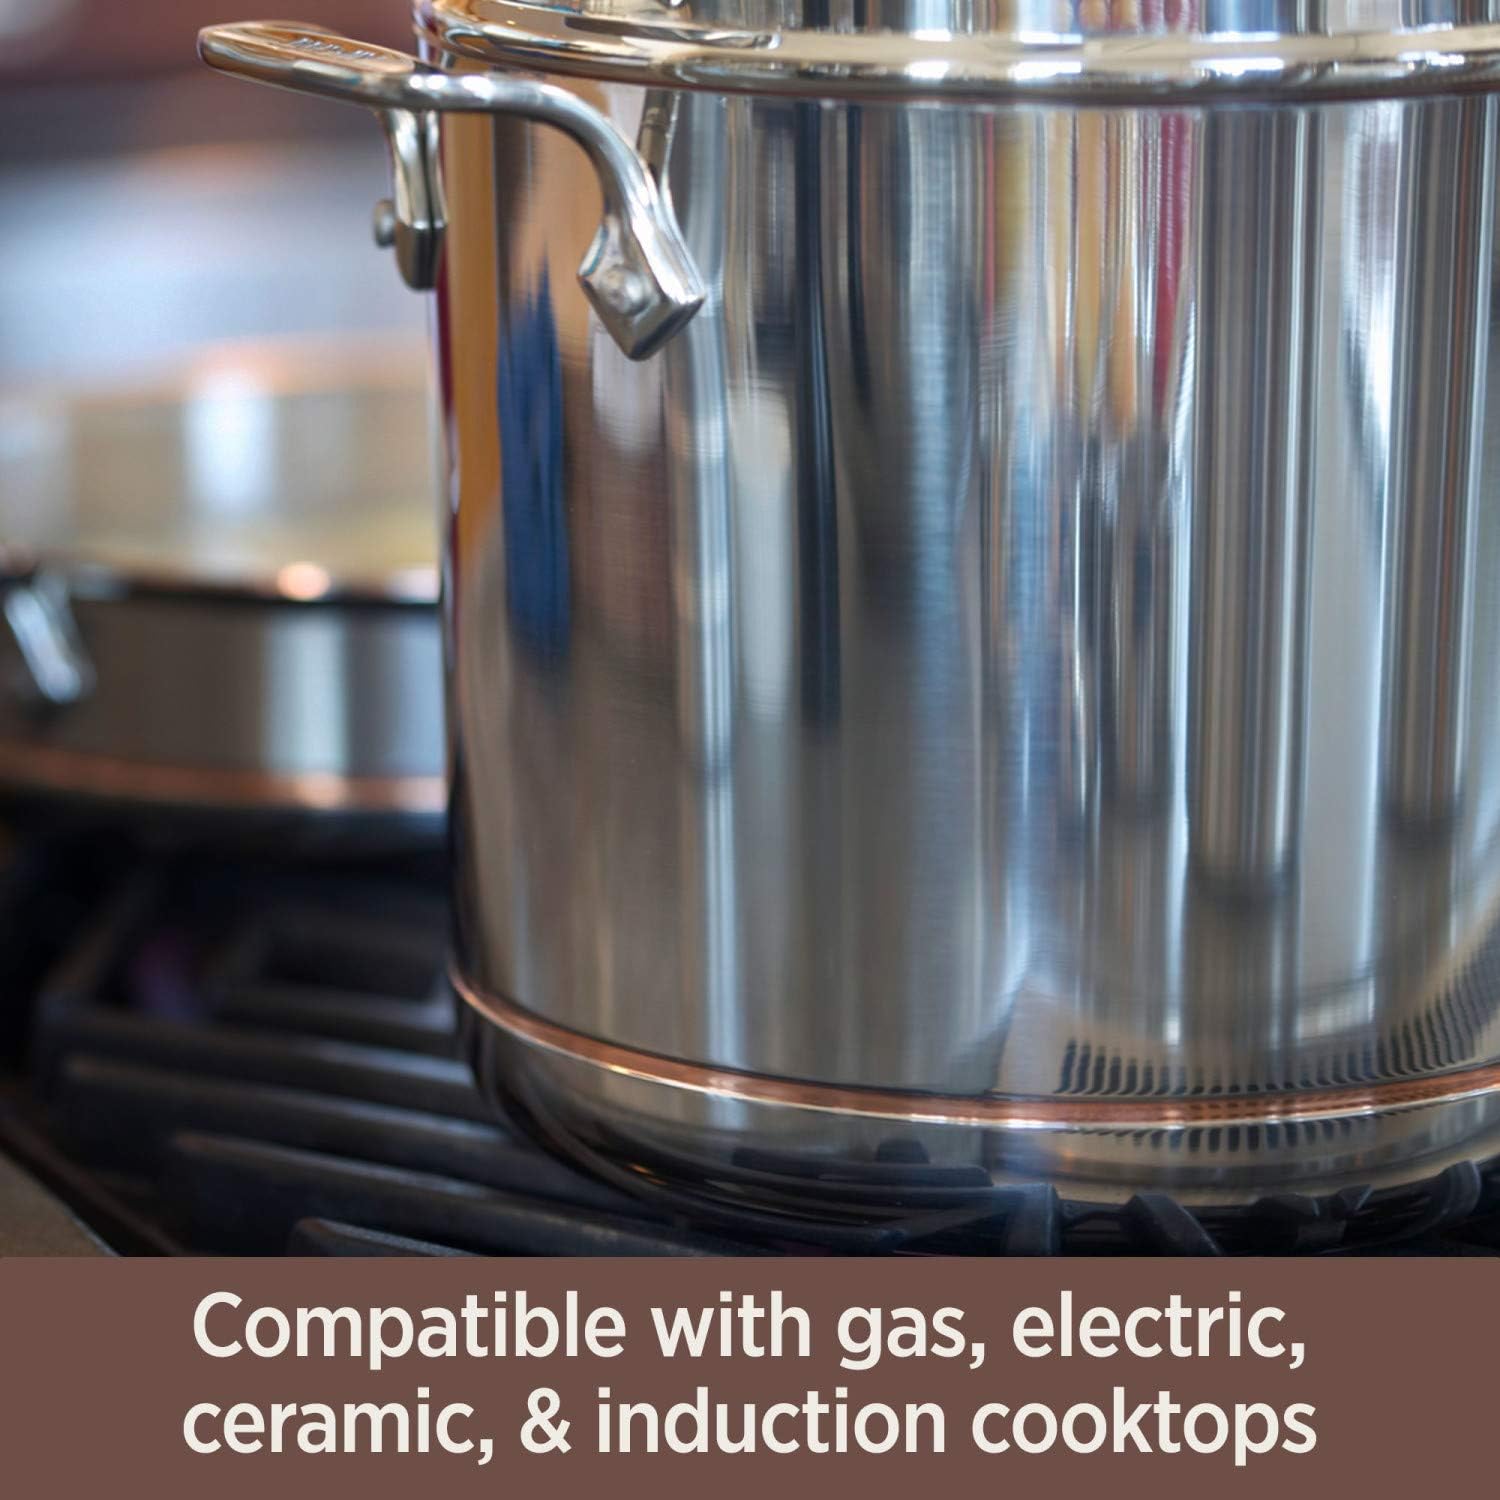 https://bigbigmart.com/wp-content/uploads/2023/08/All-Clad-Copper-Core-5-Ply-Stainless-Steel-Saucepan-with-Lid-3-Quart-Induction-Oven-Broil-Safe-600F-Pots-and-Pans-Cookware4.jpg